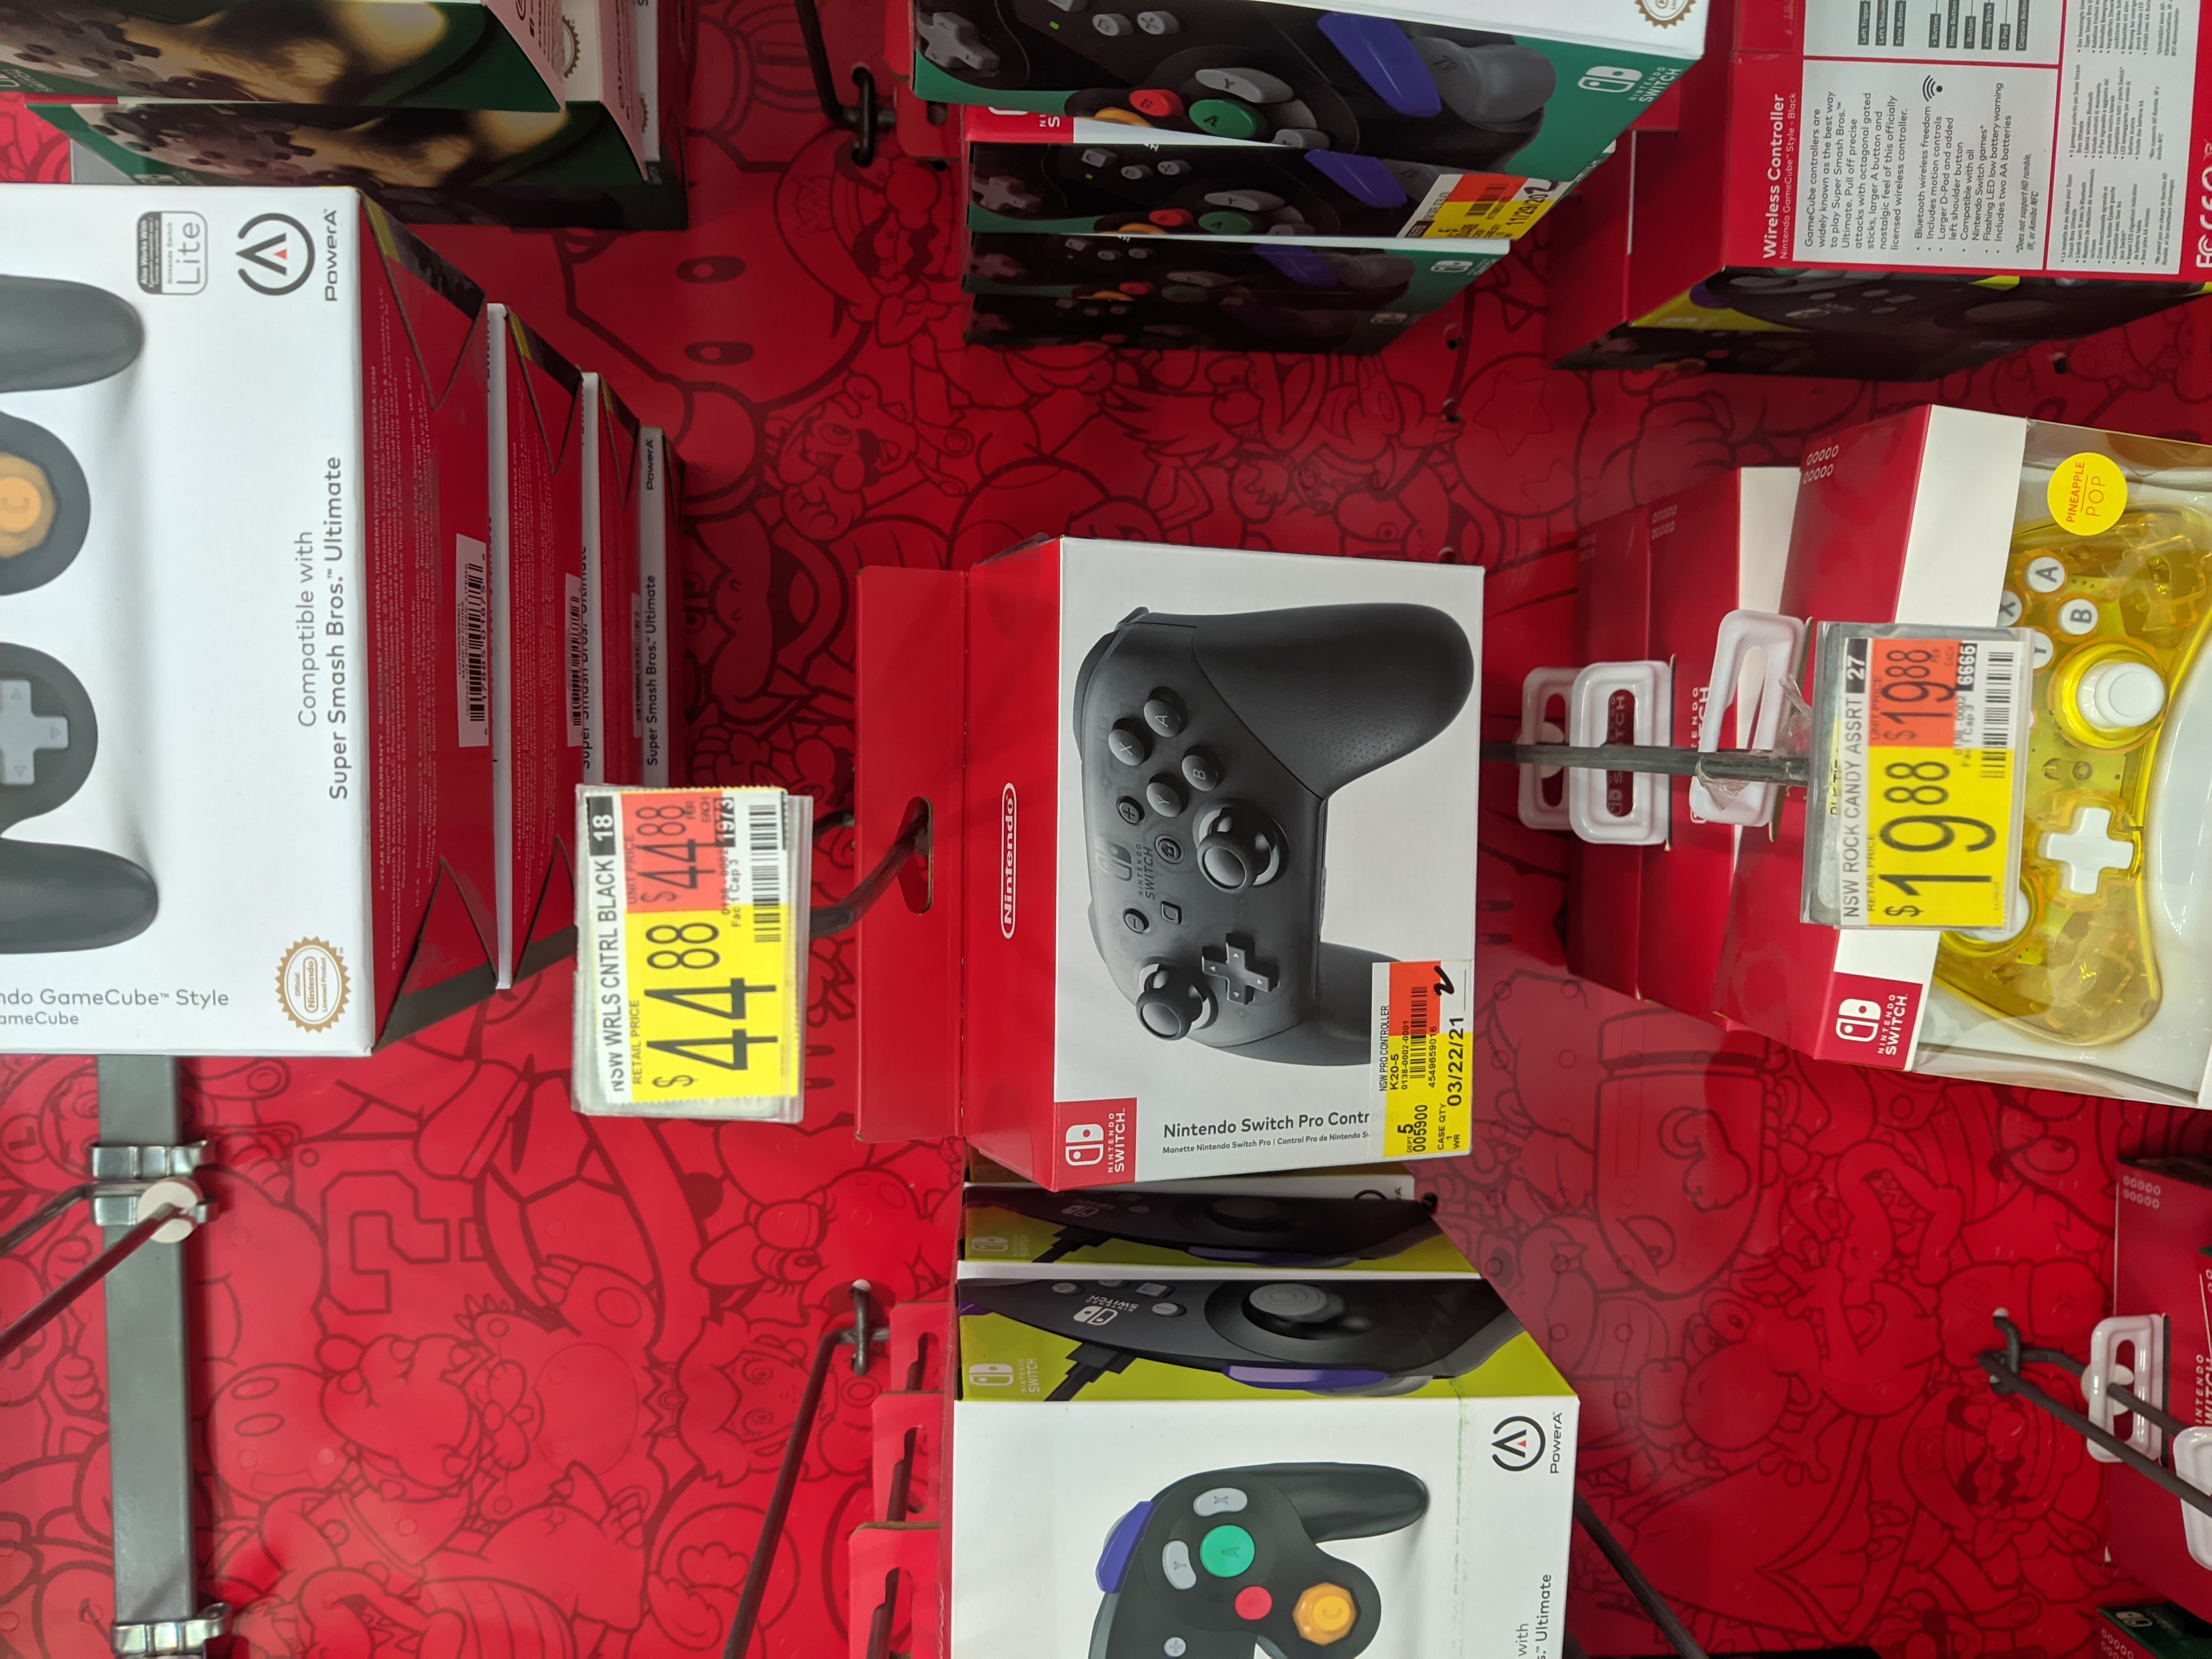 Nintendo Switch Pro Controller. In store only. YMMV.